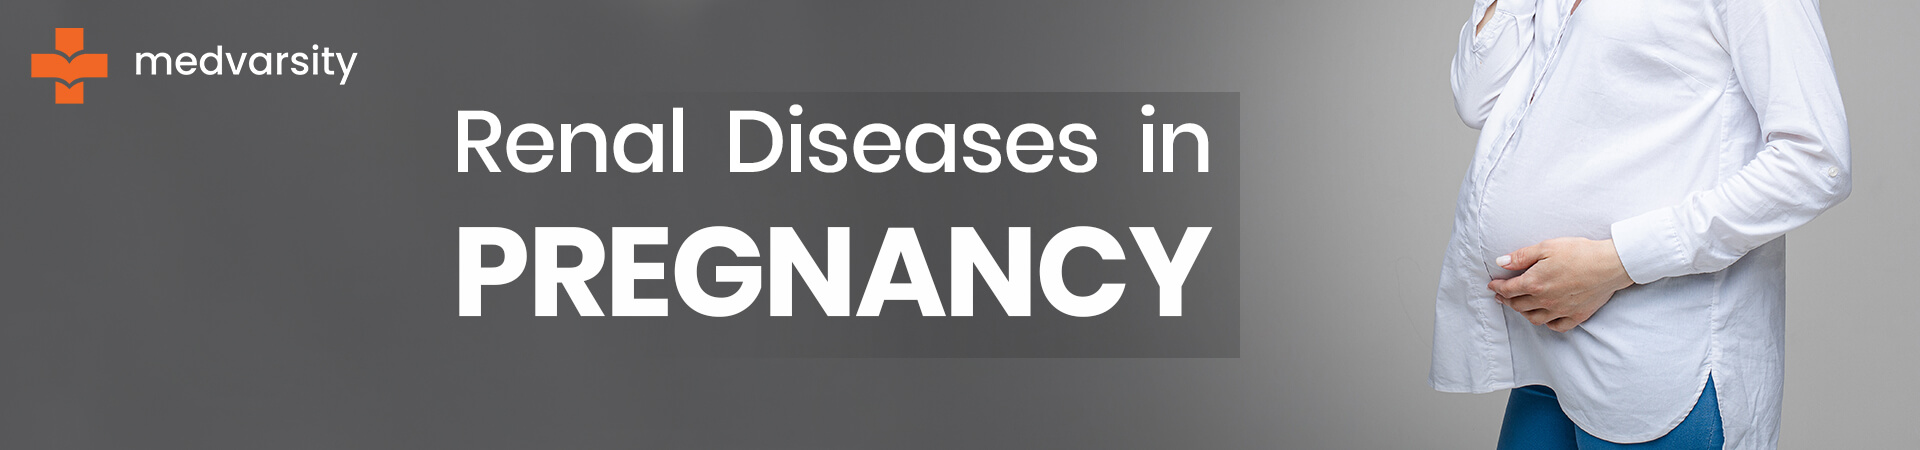 Explore the complexities of renal diseases during pregnancy.